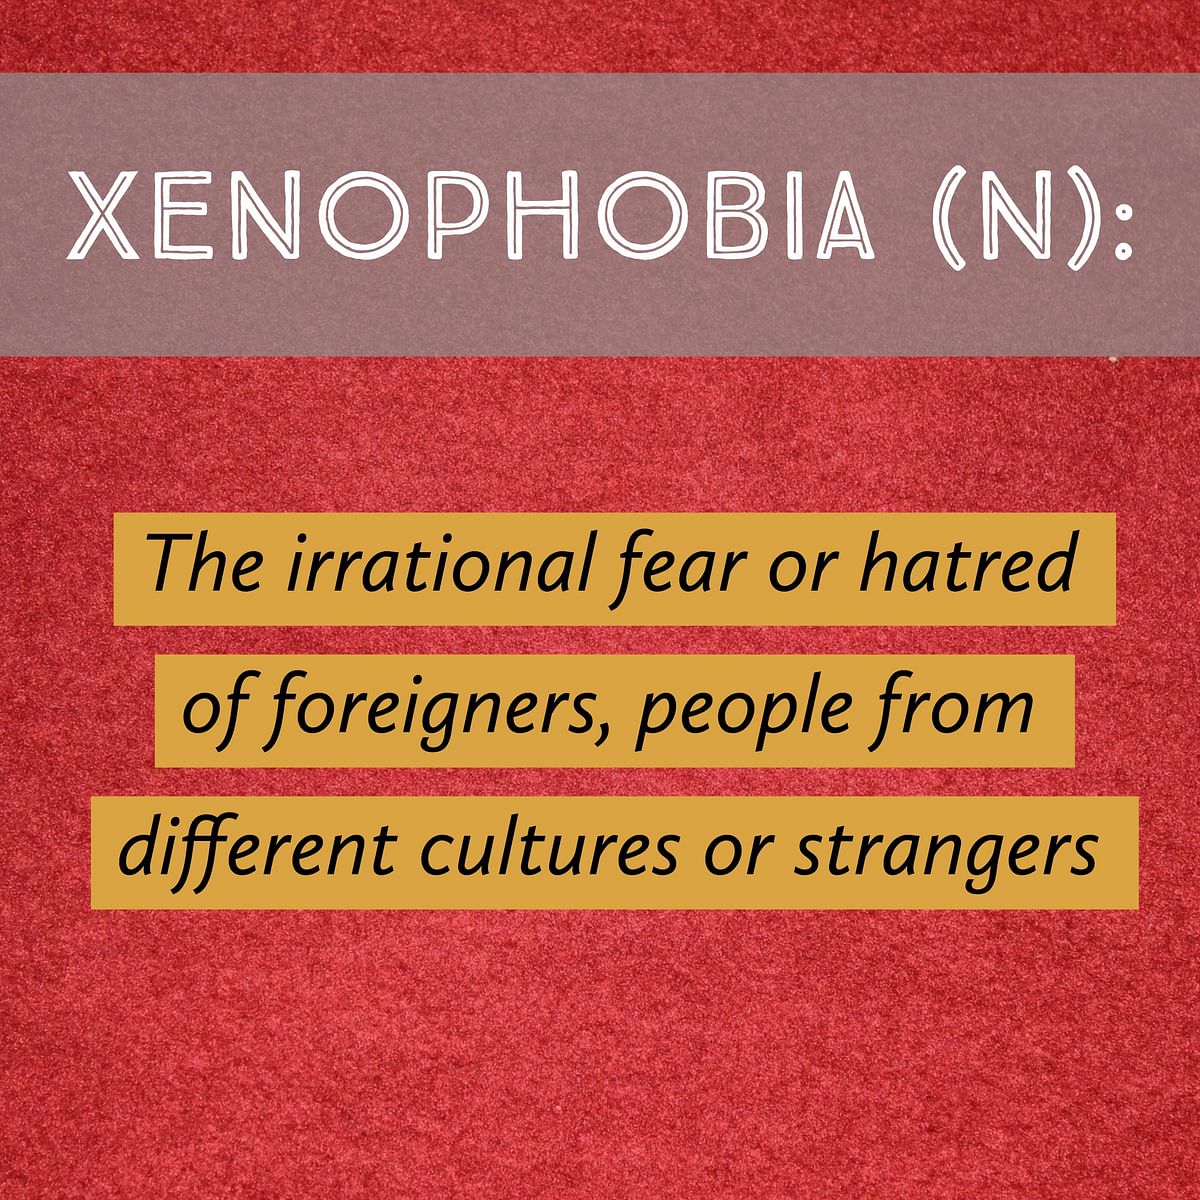 The 2015 Word of the Year was “identity”. This year, it’s “xenophobia”. Do you sense a pattern?